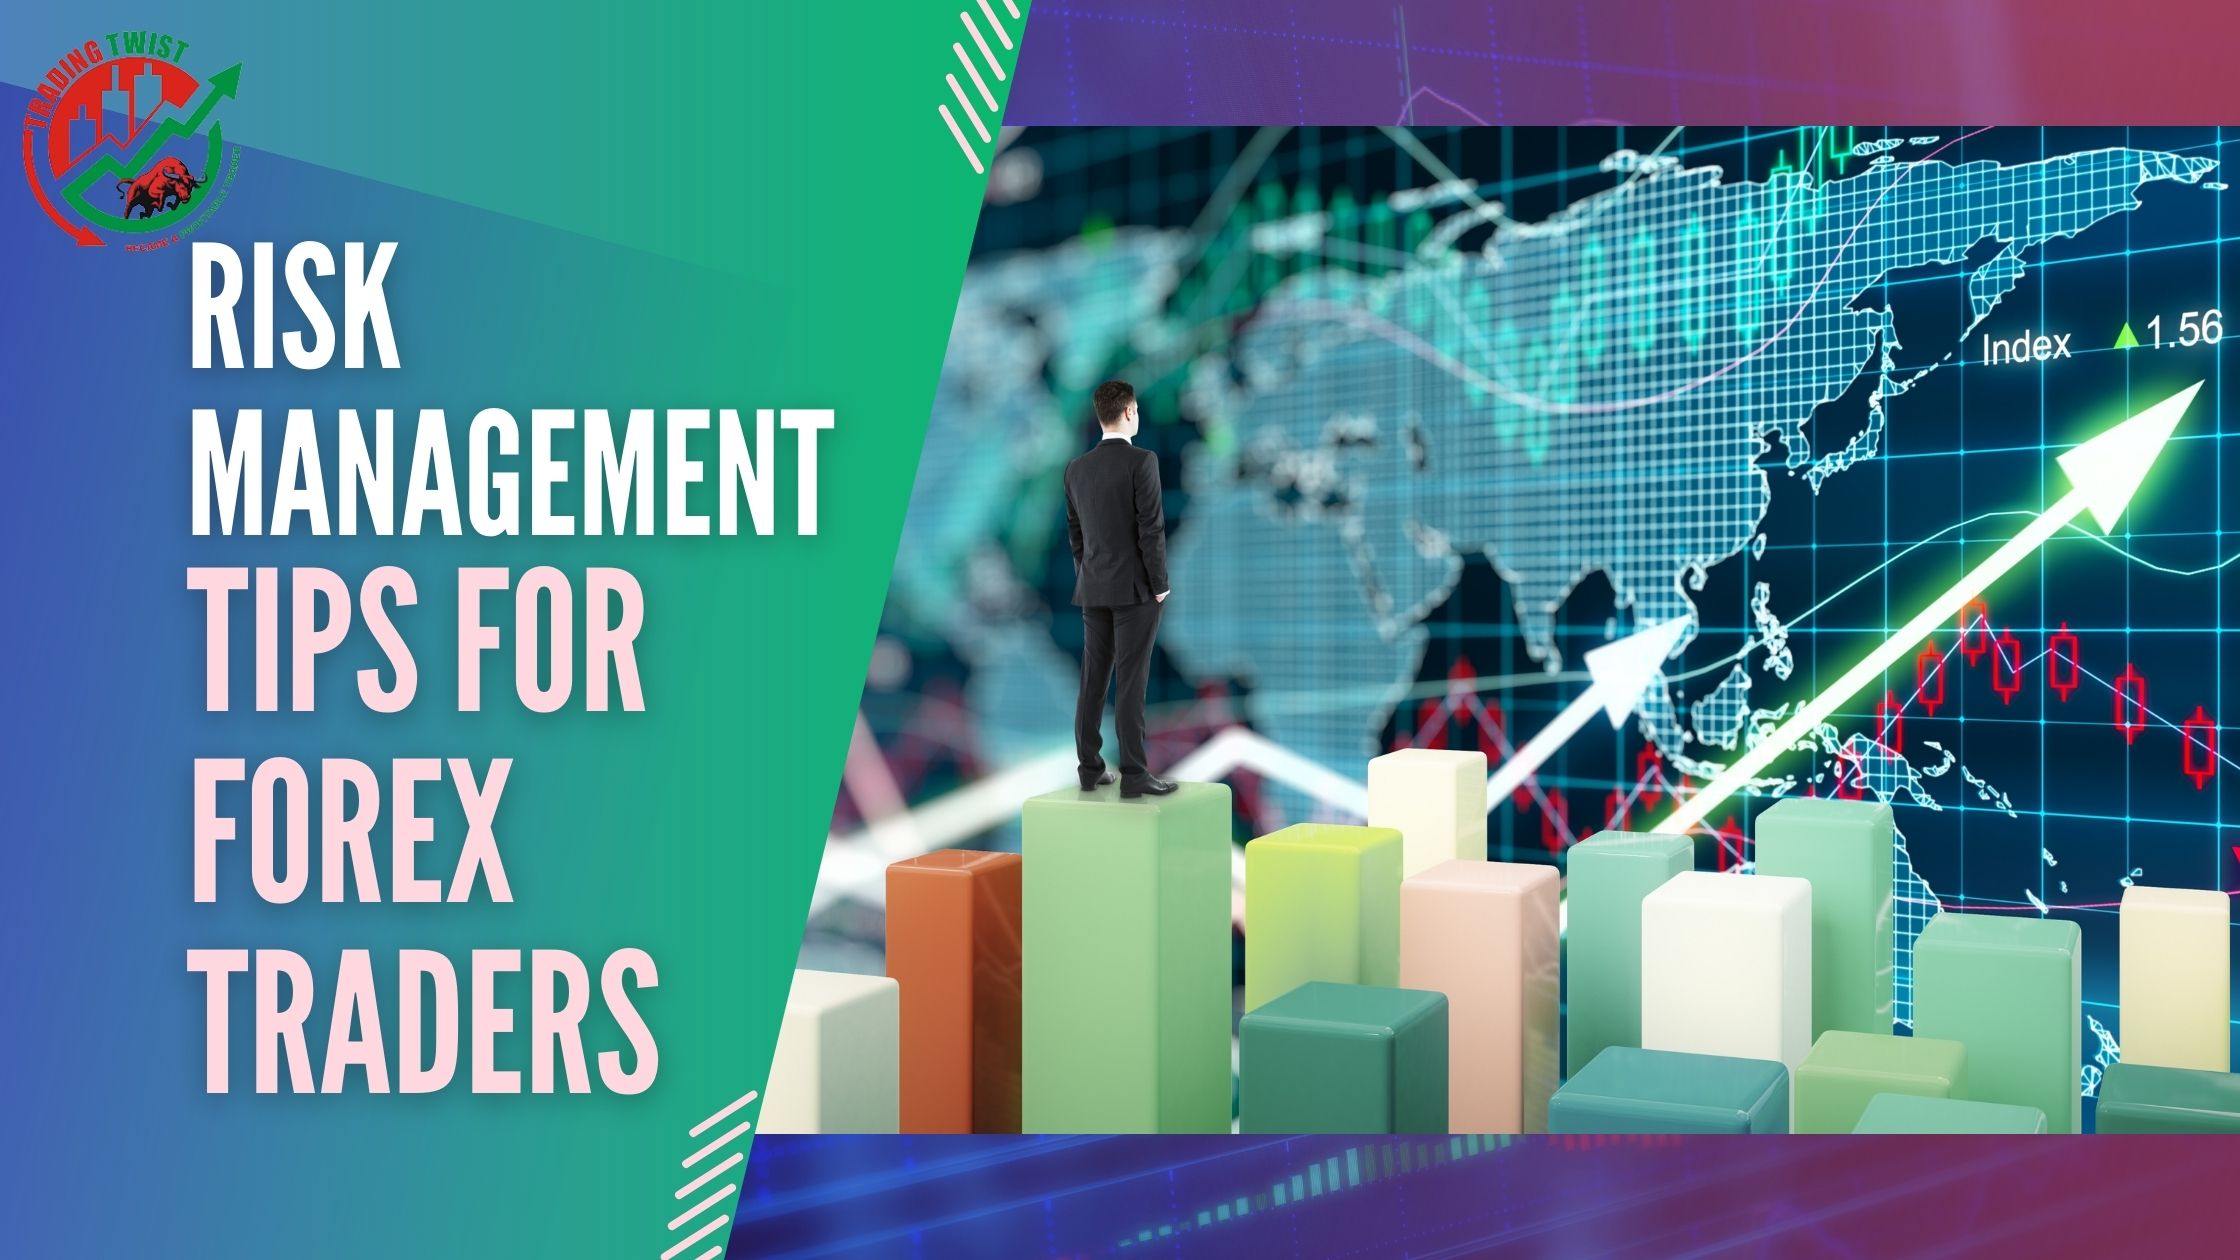 Risk Management Tips for Forex Traders